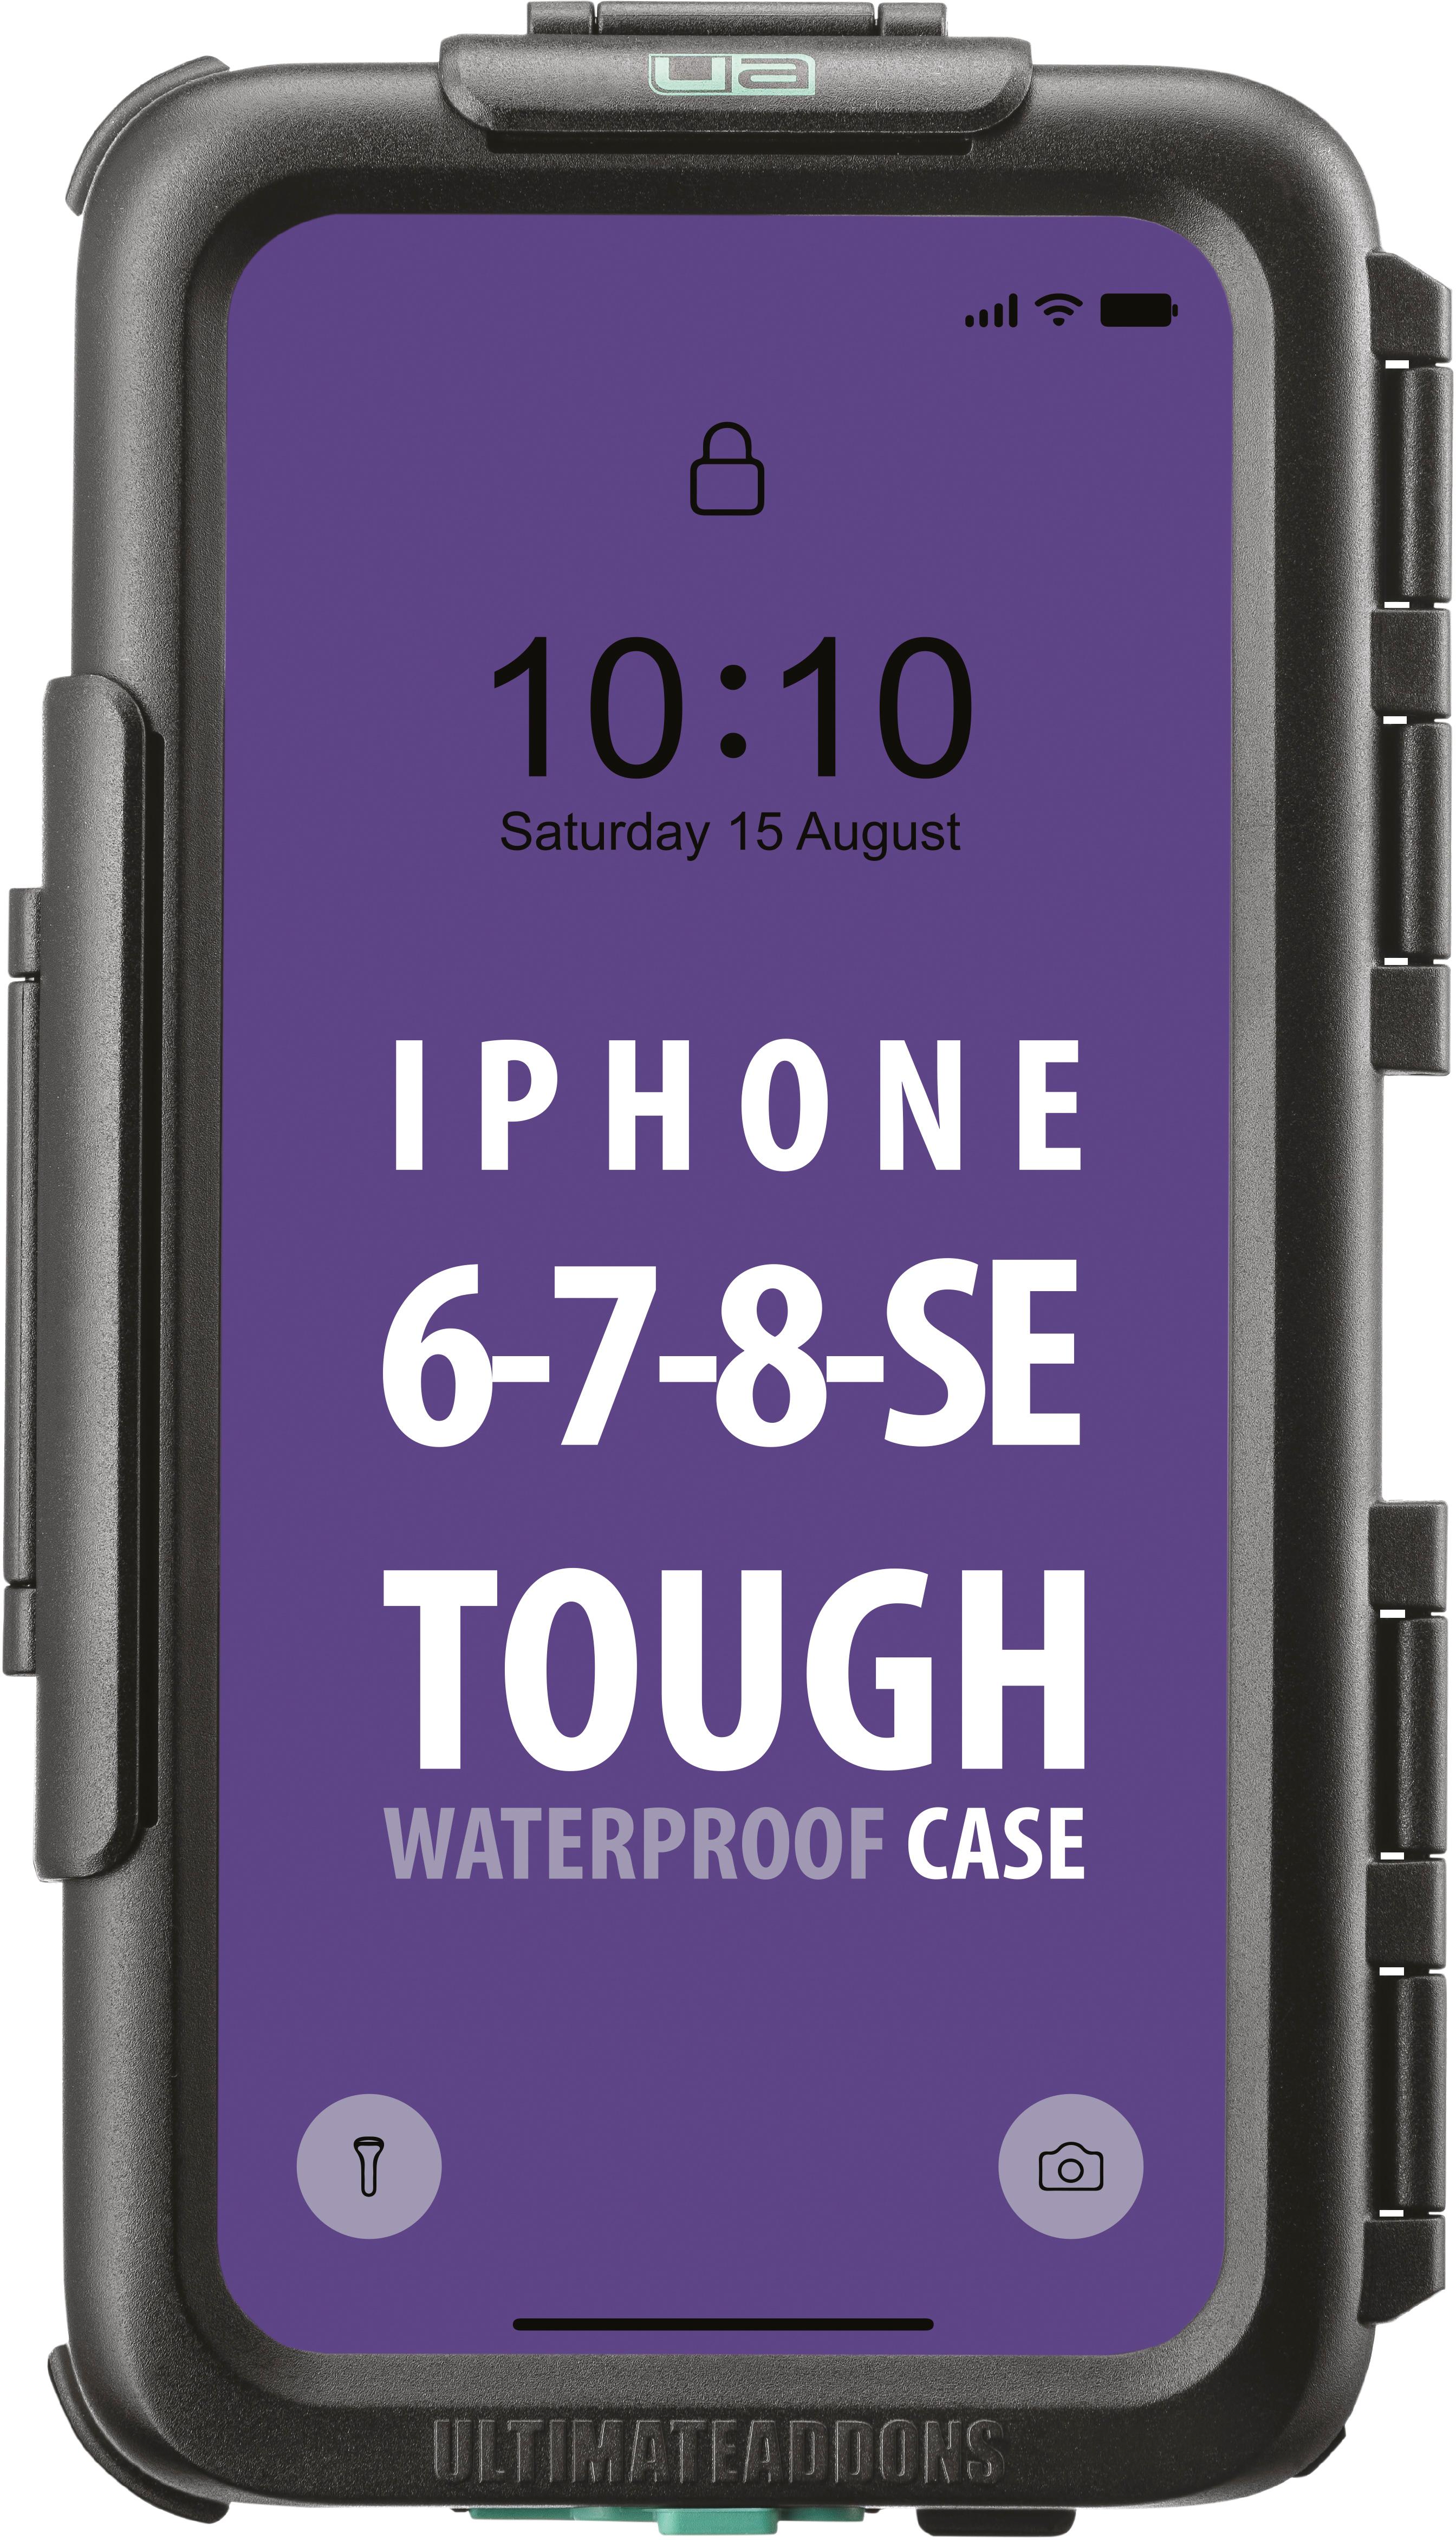 Ultimateaddons Ipx5 Case For Iphone 6/7/8 Plus